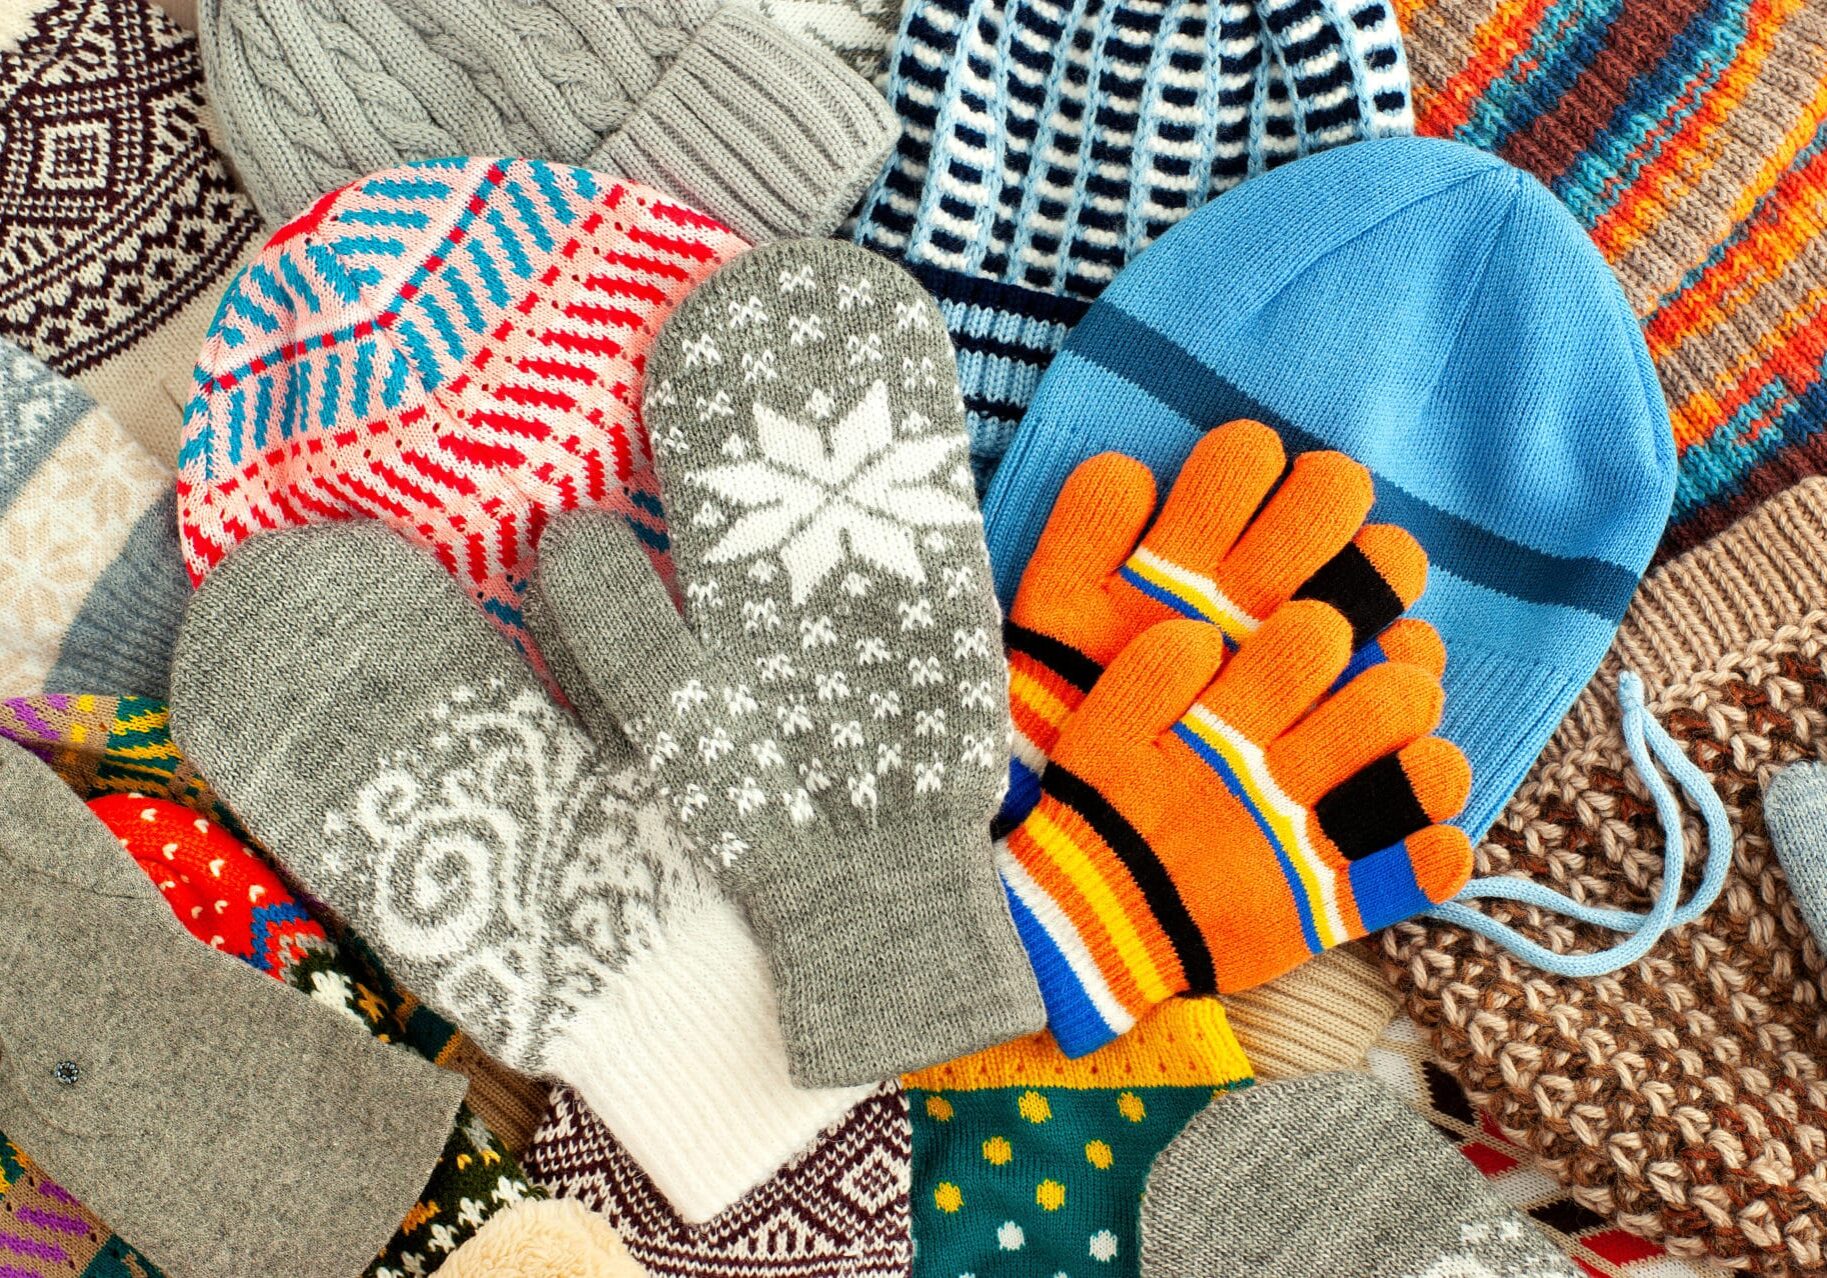 Colorful hats, mittens and gloves